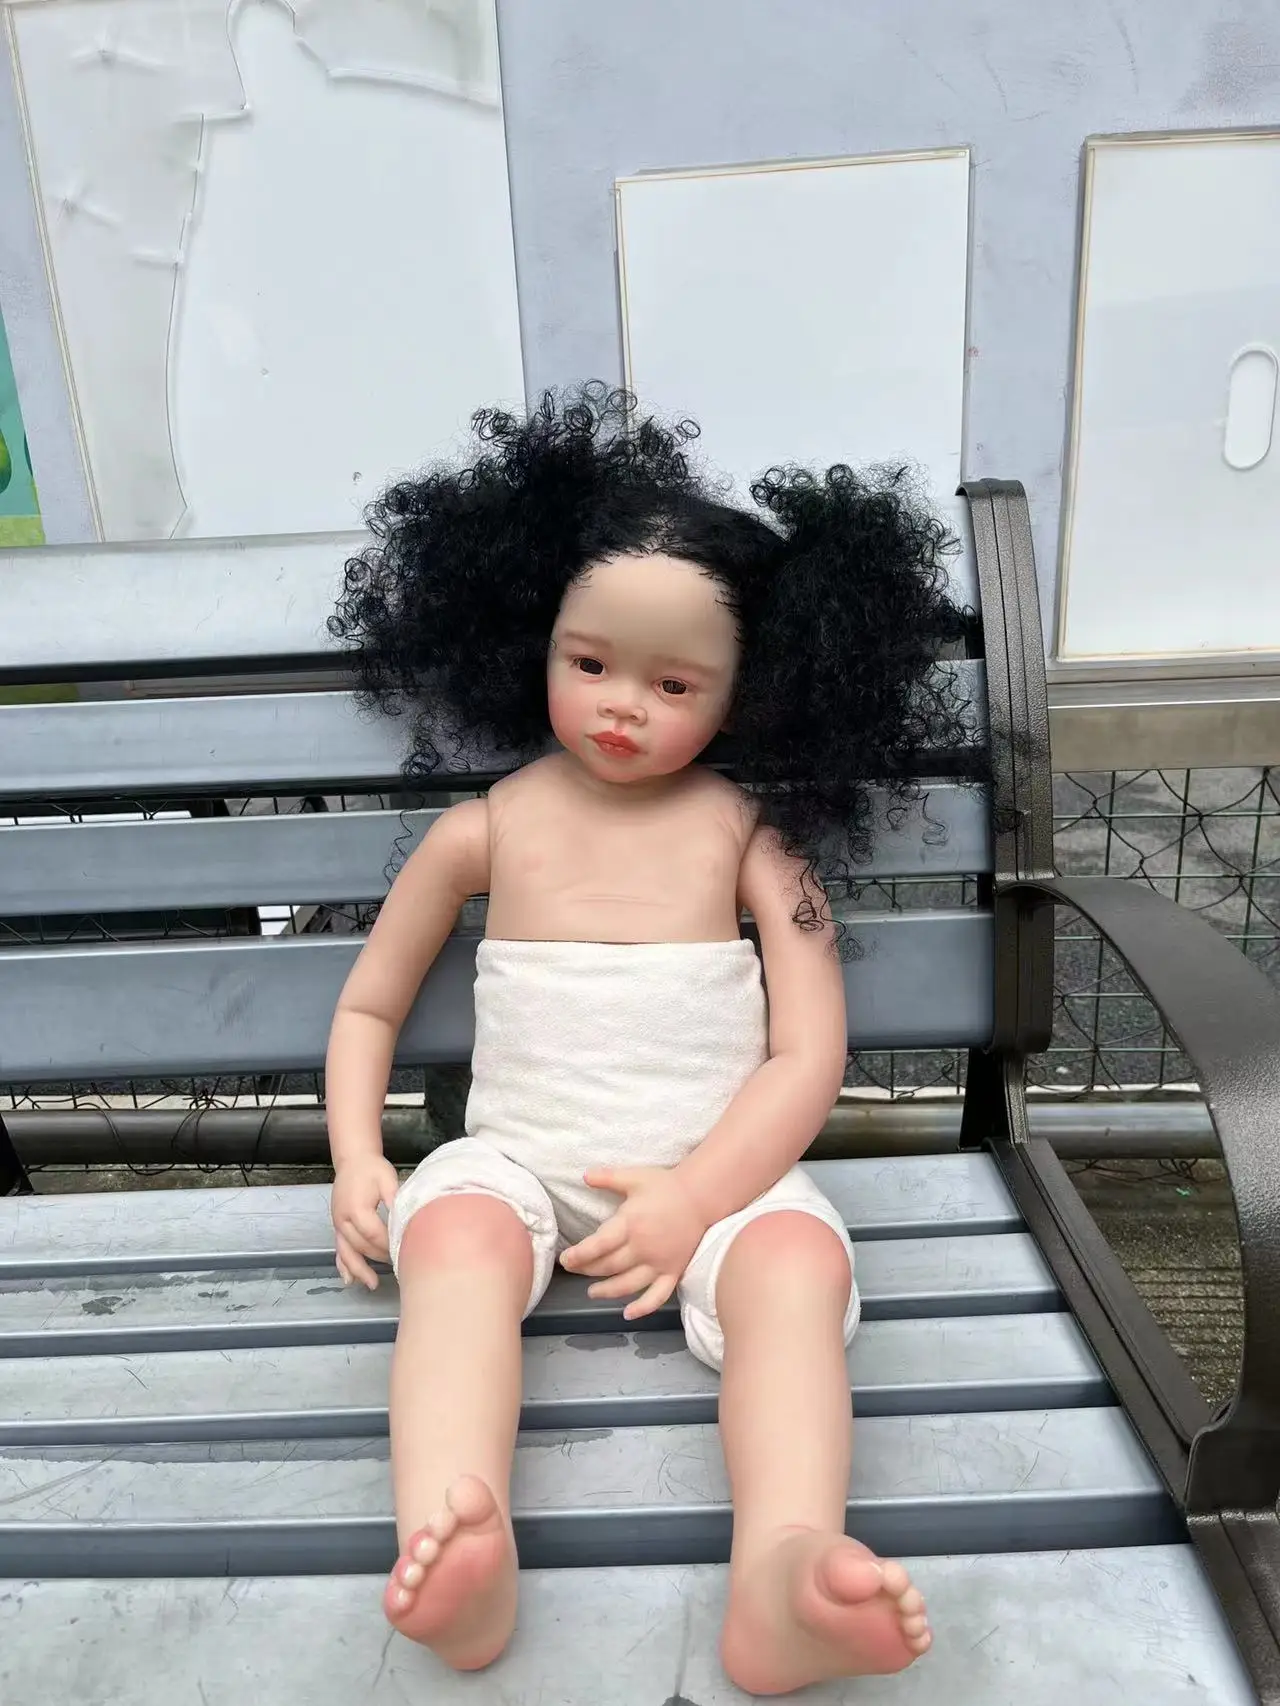 FBBD Customzied Limited Supply 32inch Reborn Baby Doll Meili With Curly Black Hair Reak Photos DIY Part Painted Kits fbbd customized limited supply 32inch reborn baby doll meili dark skin with curly hair already finished doll different dress